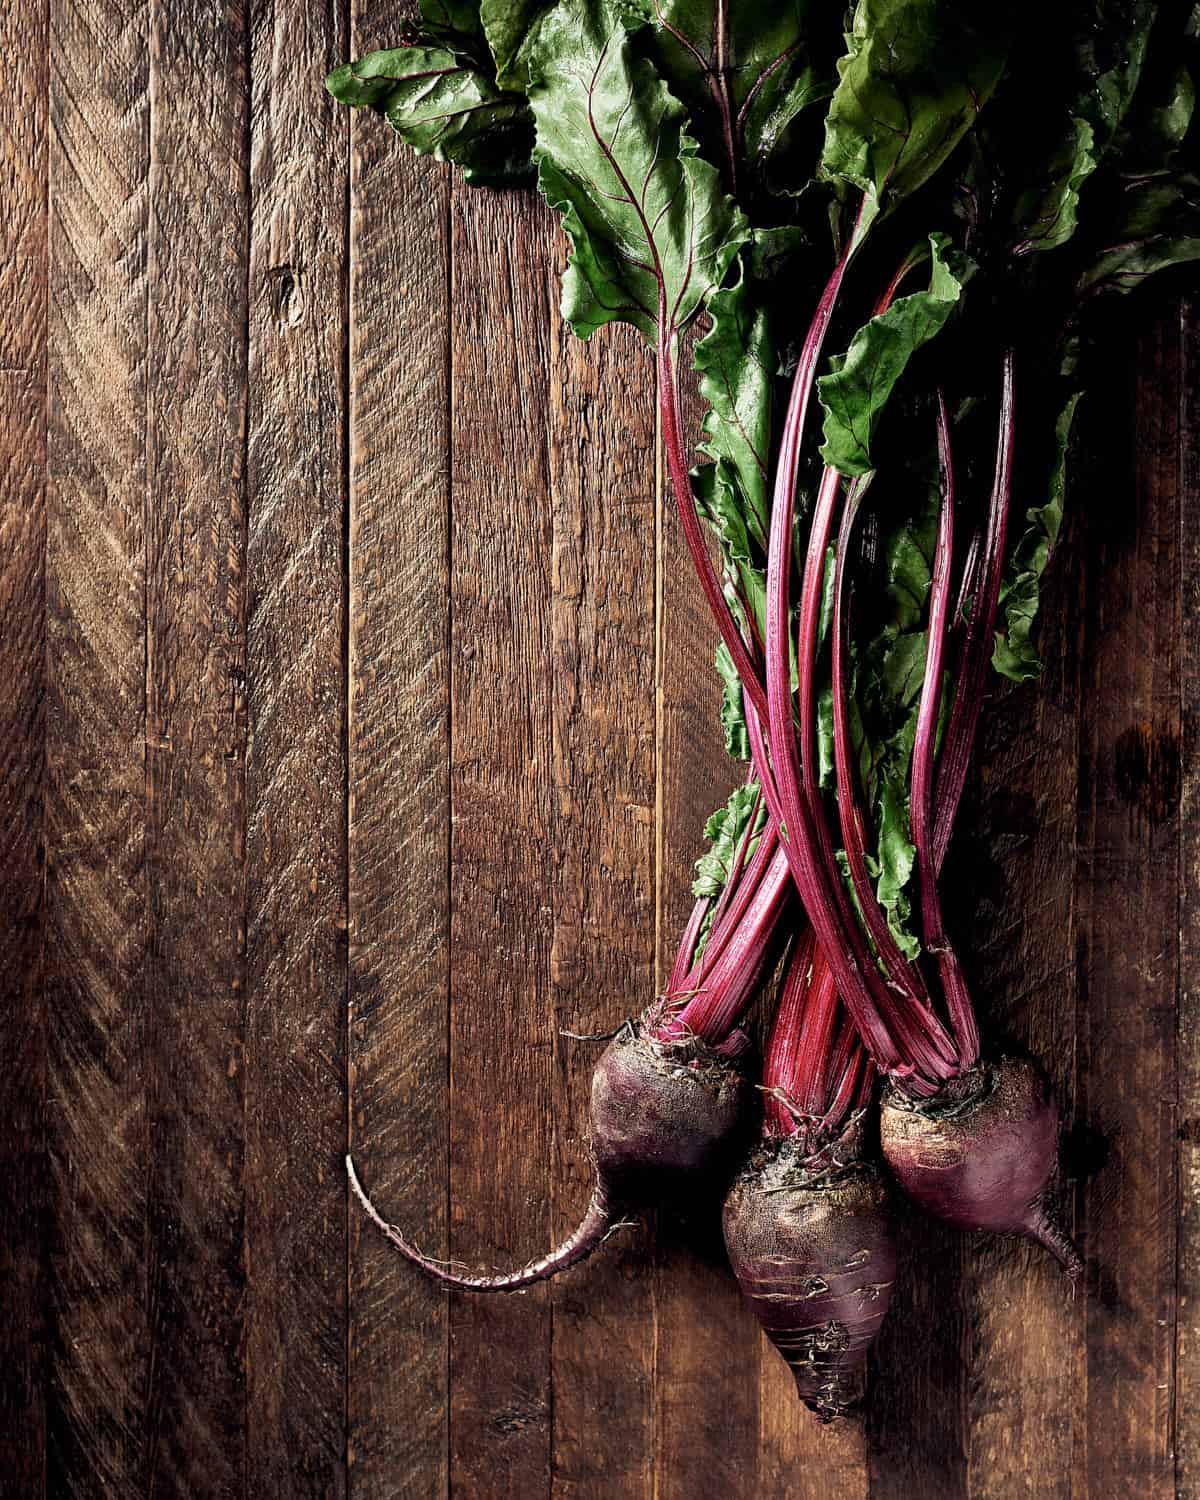 3 beets with beet greens on wooden background